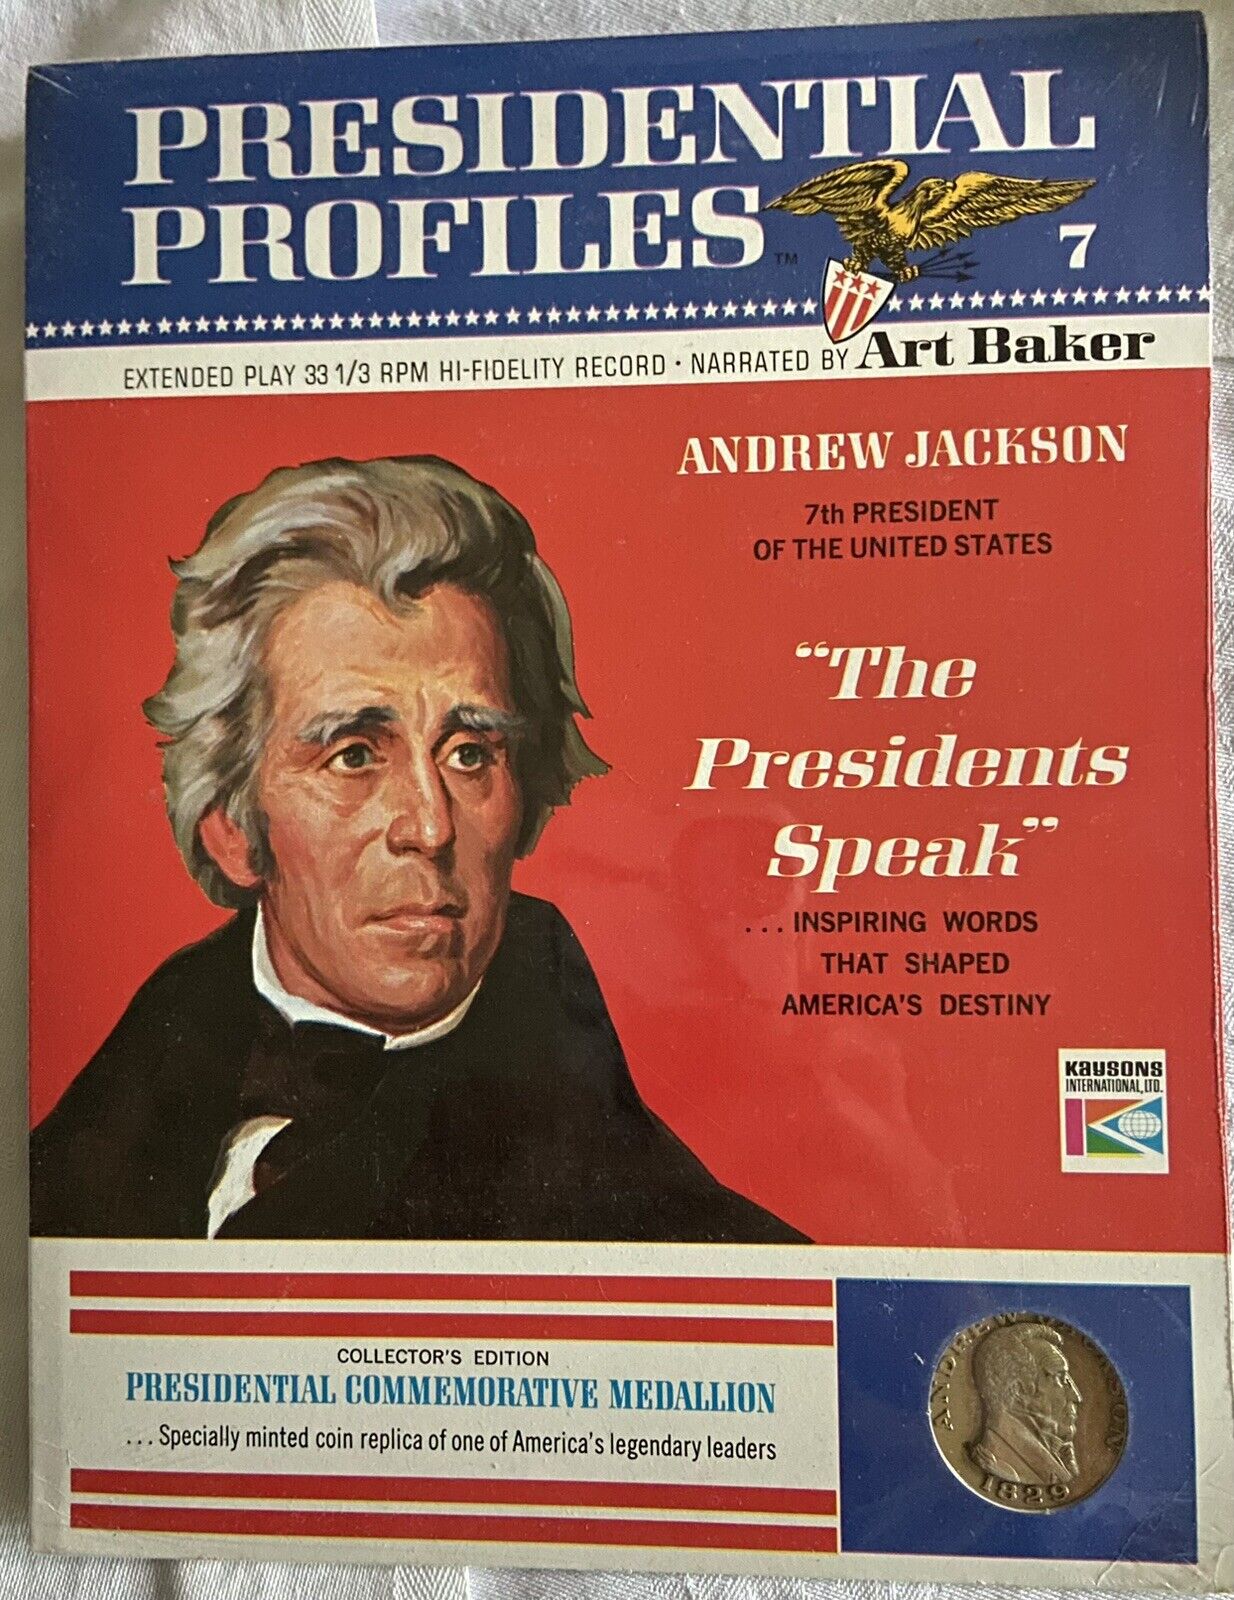 PRESIDENTIAL PROFILES - SEALED ANDREW JACKSON INCLUDES RECORD